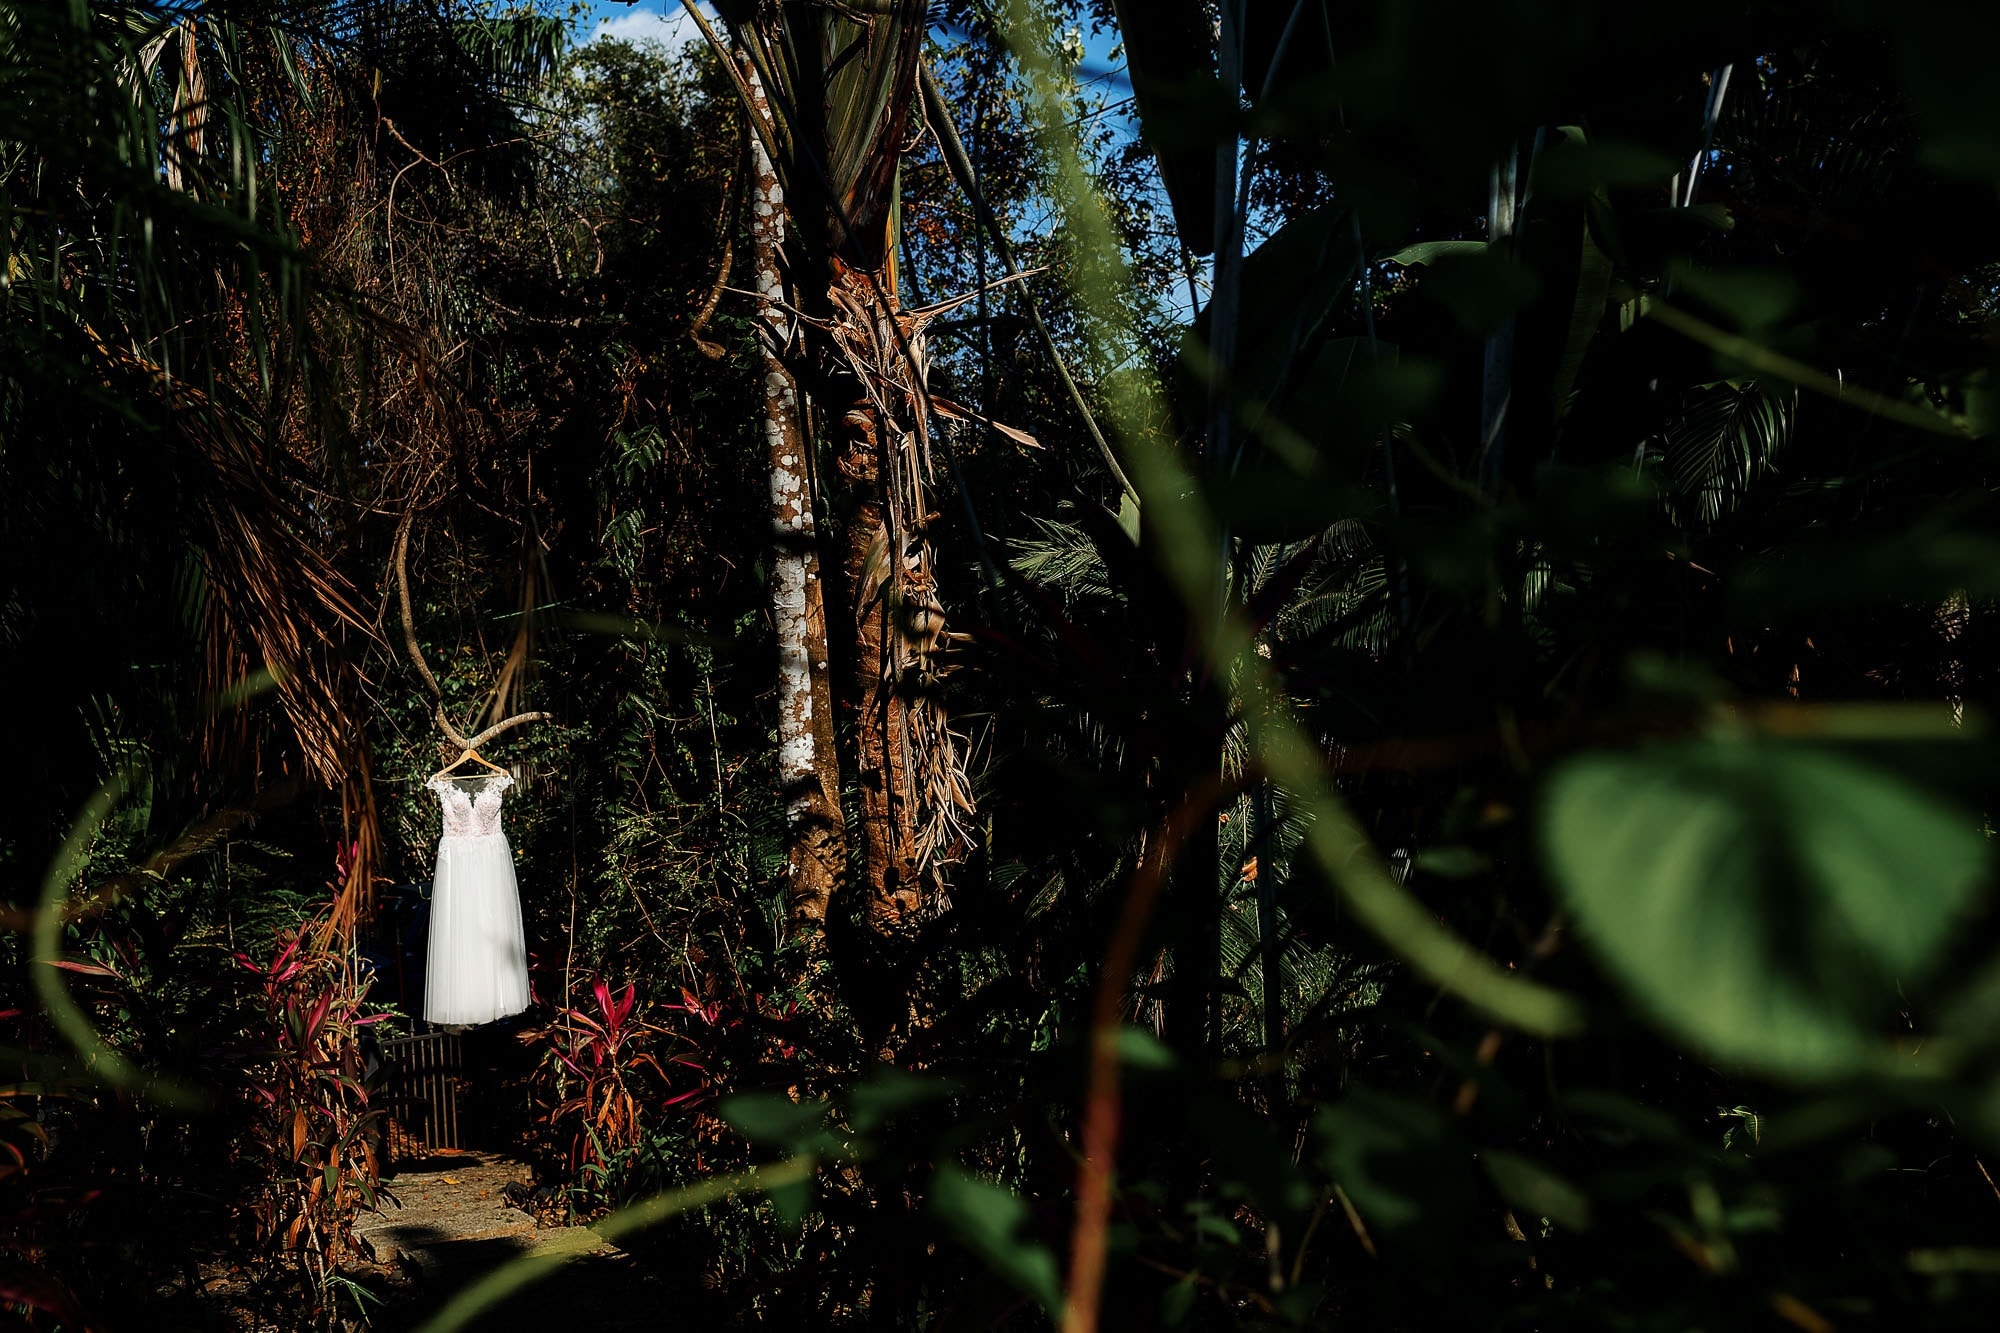 The wedding dress hanging in the jungle